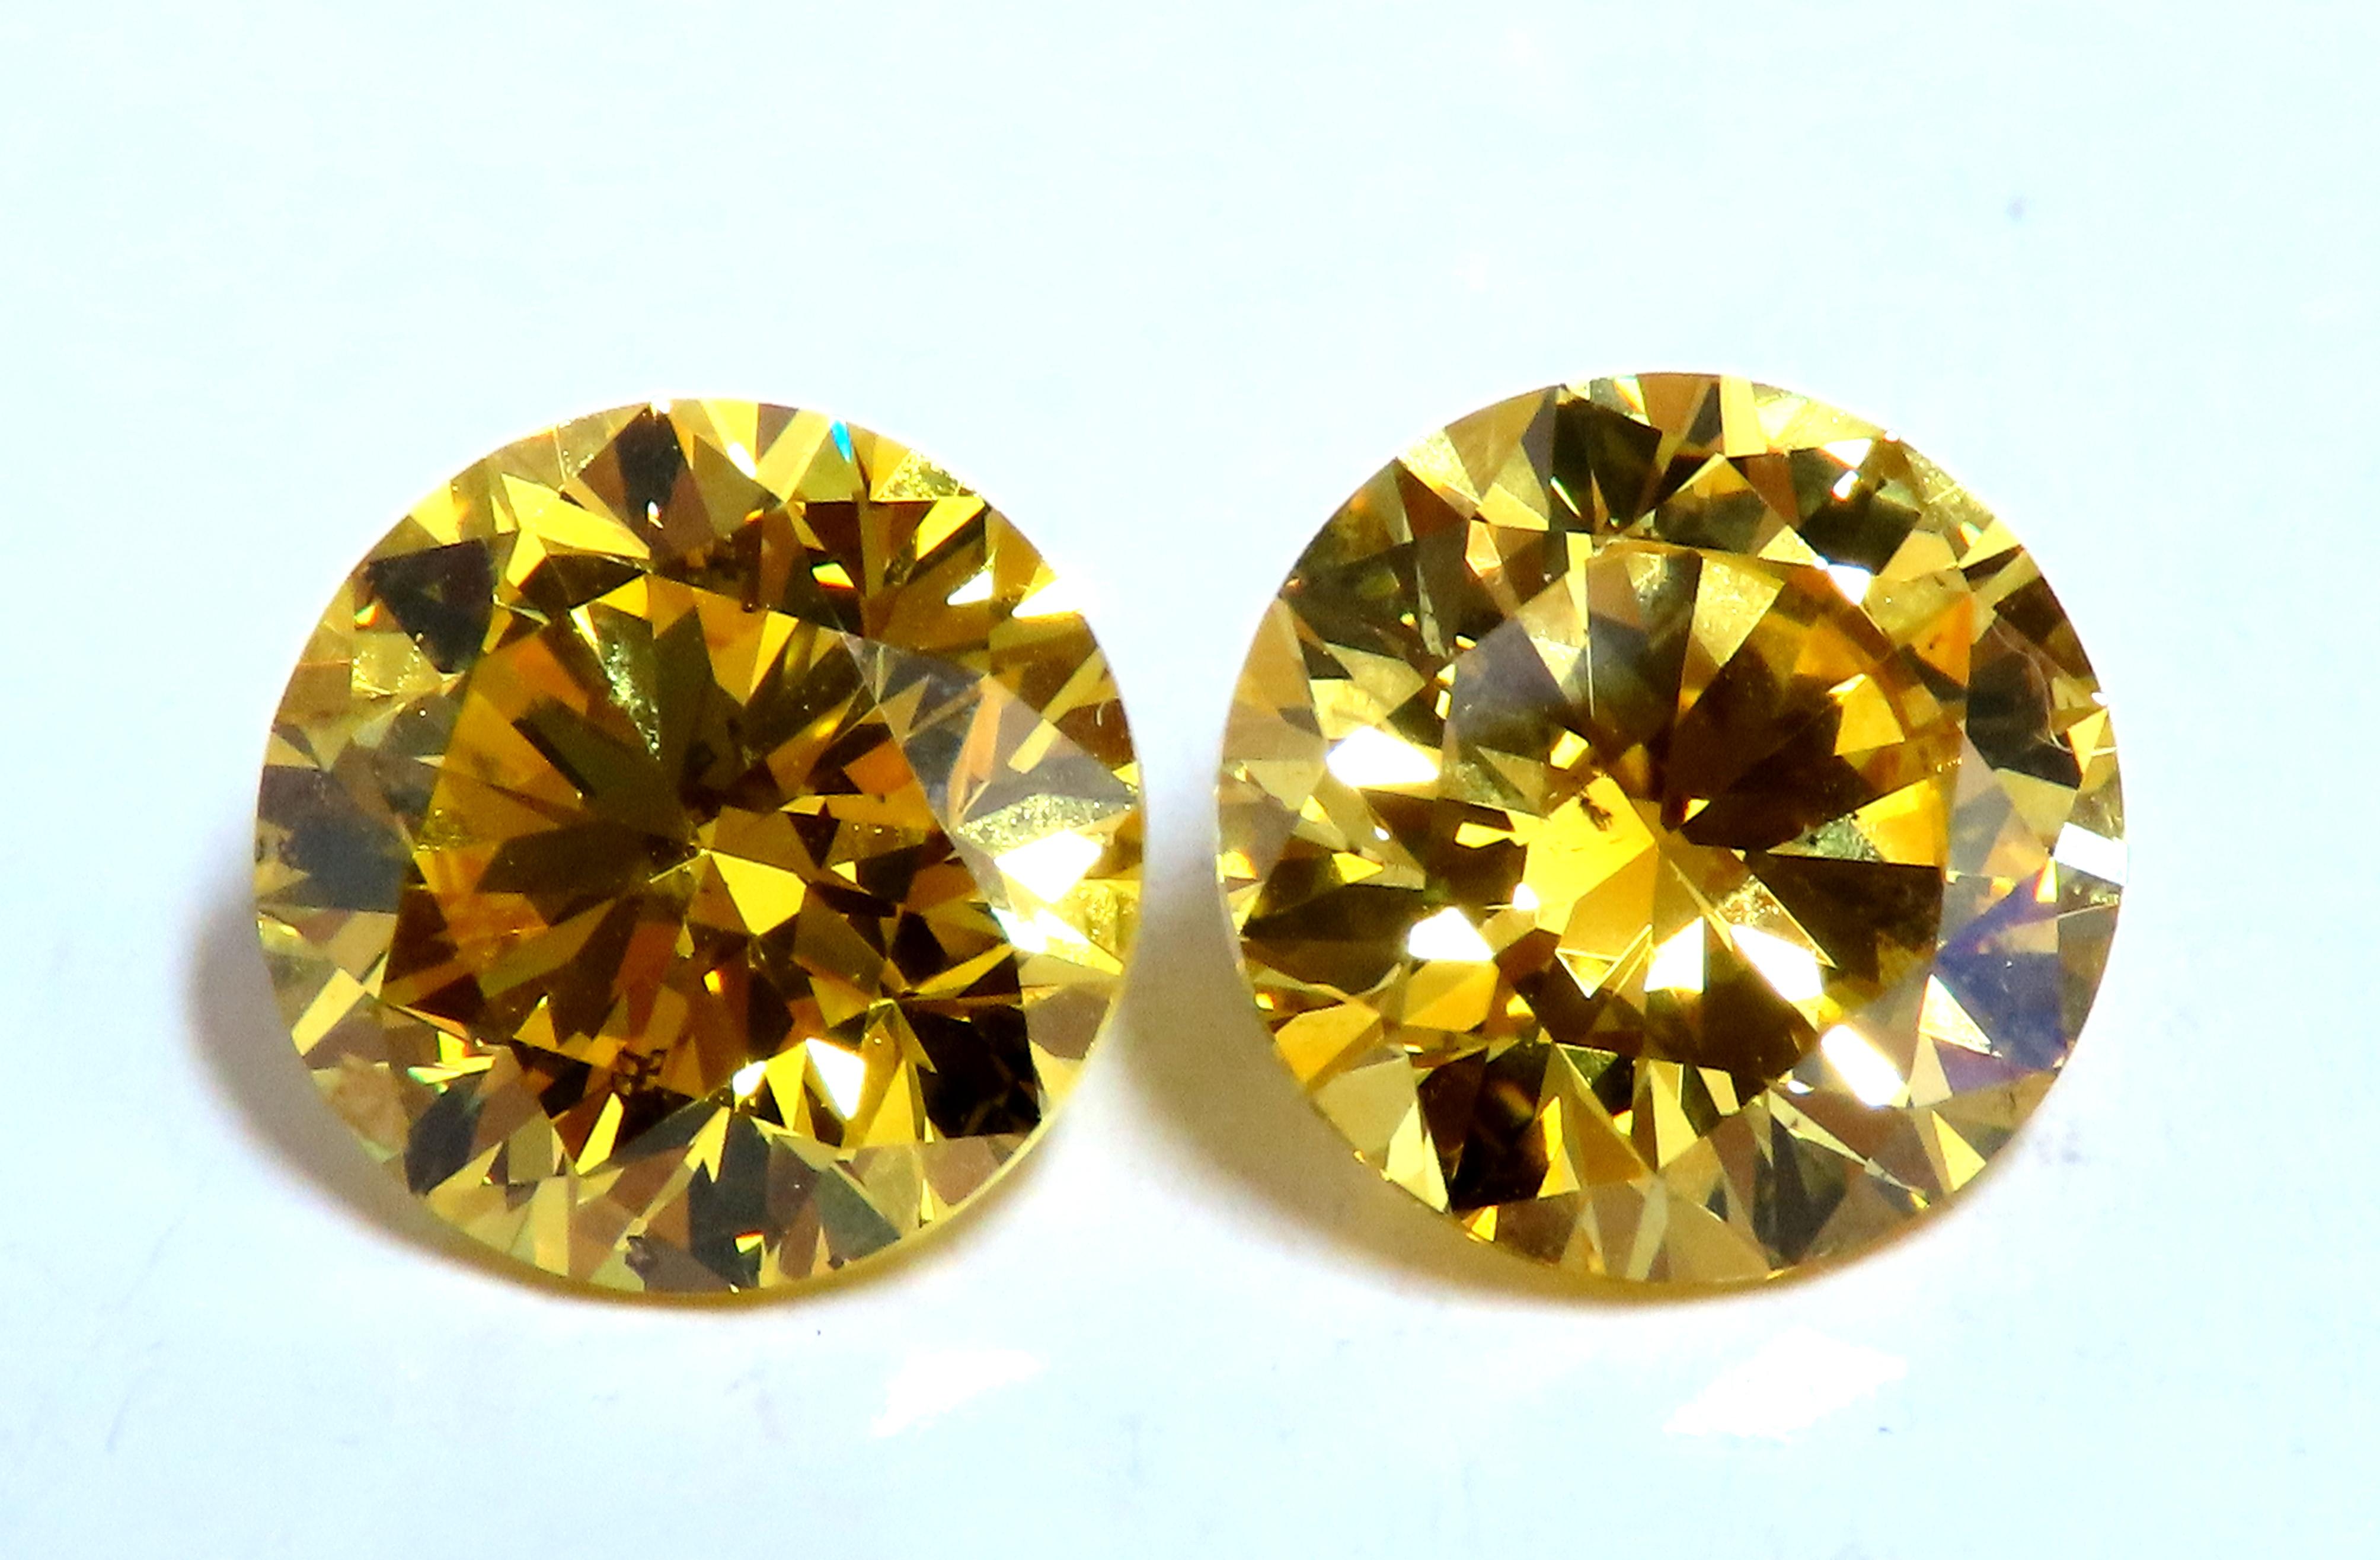 2.05ct & 2.01ct Natural GIA Certified Fancy Vivid Yellow diamonds. 
Matching pair for Studs.
The only ones available on market- rare.
Si-1 clarity. 
Buyer welcome to choose 18kt or platinum mounting.
We also have design services -in house.
Avis